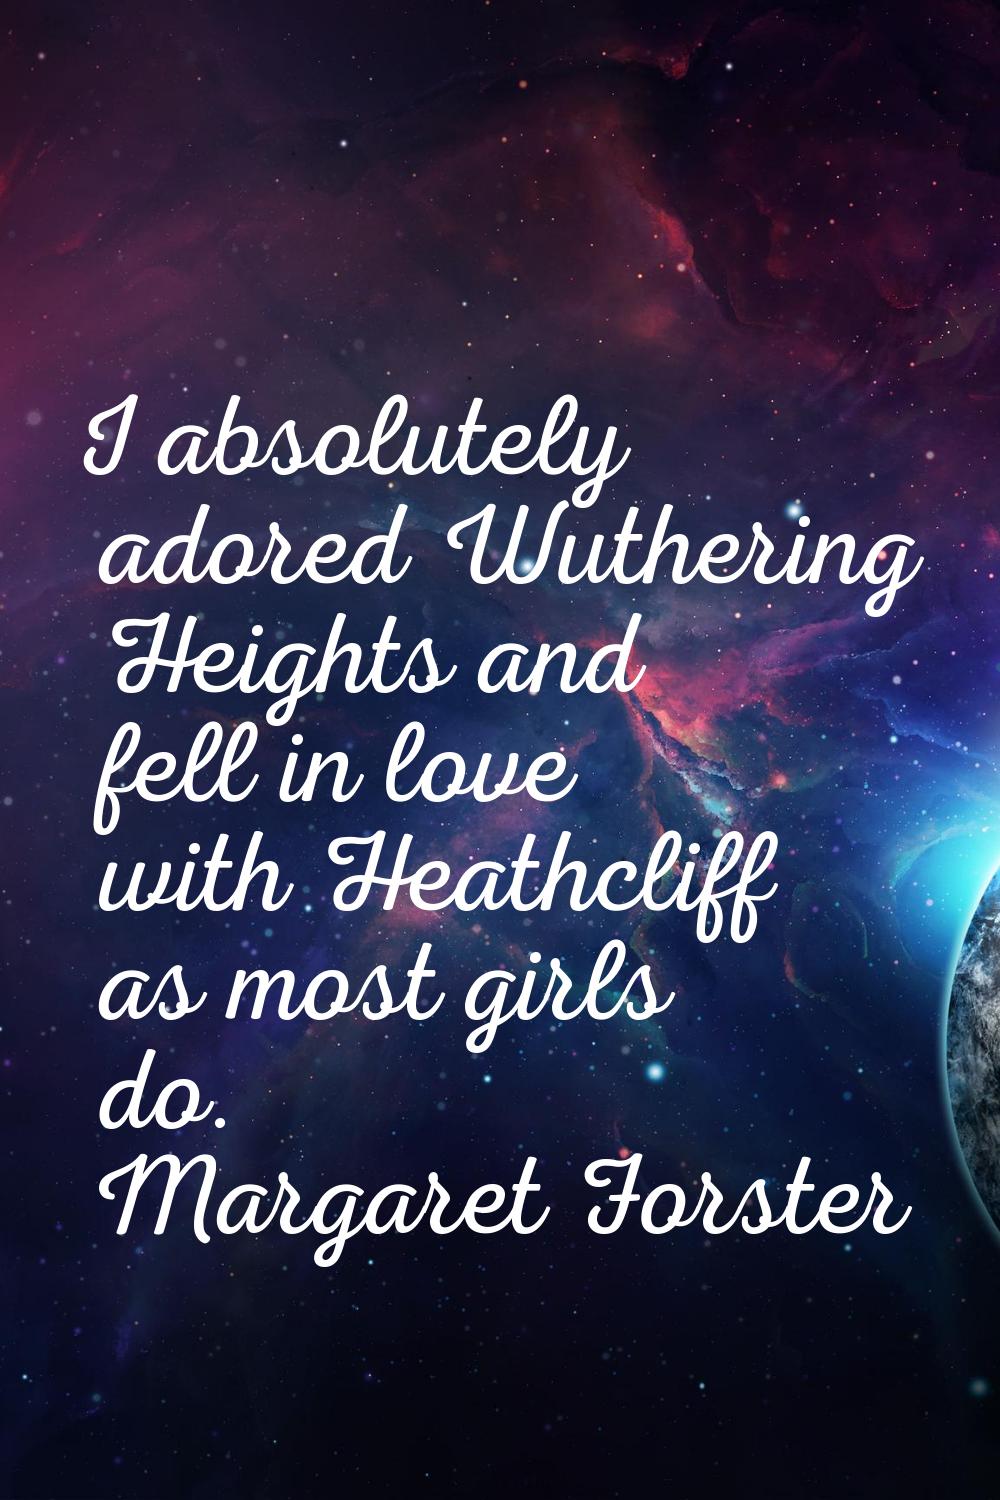 I absolutely adored Wuthering Heights and fell in love with Heathcliff as most girls do.